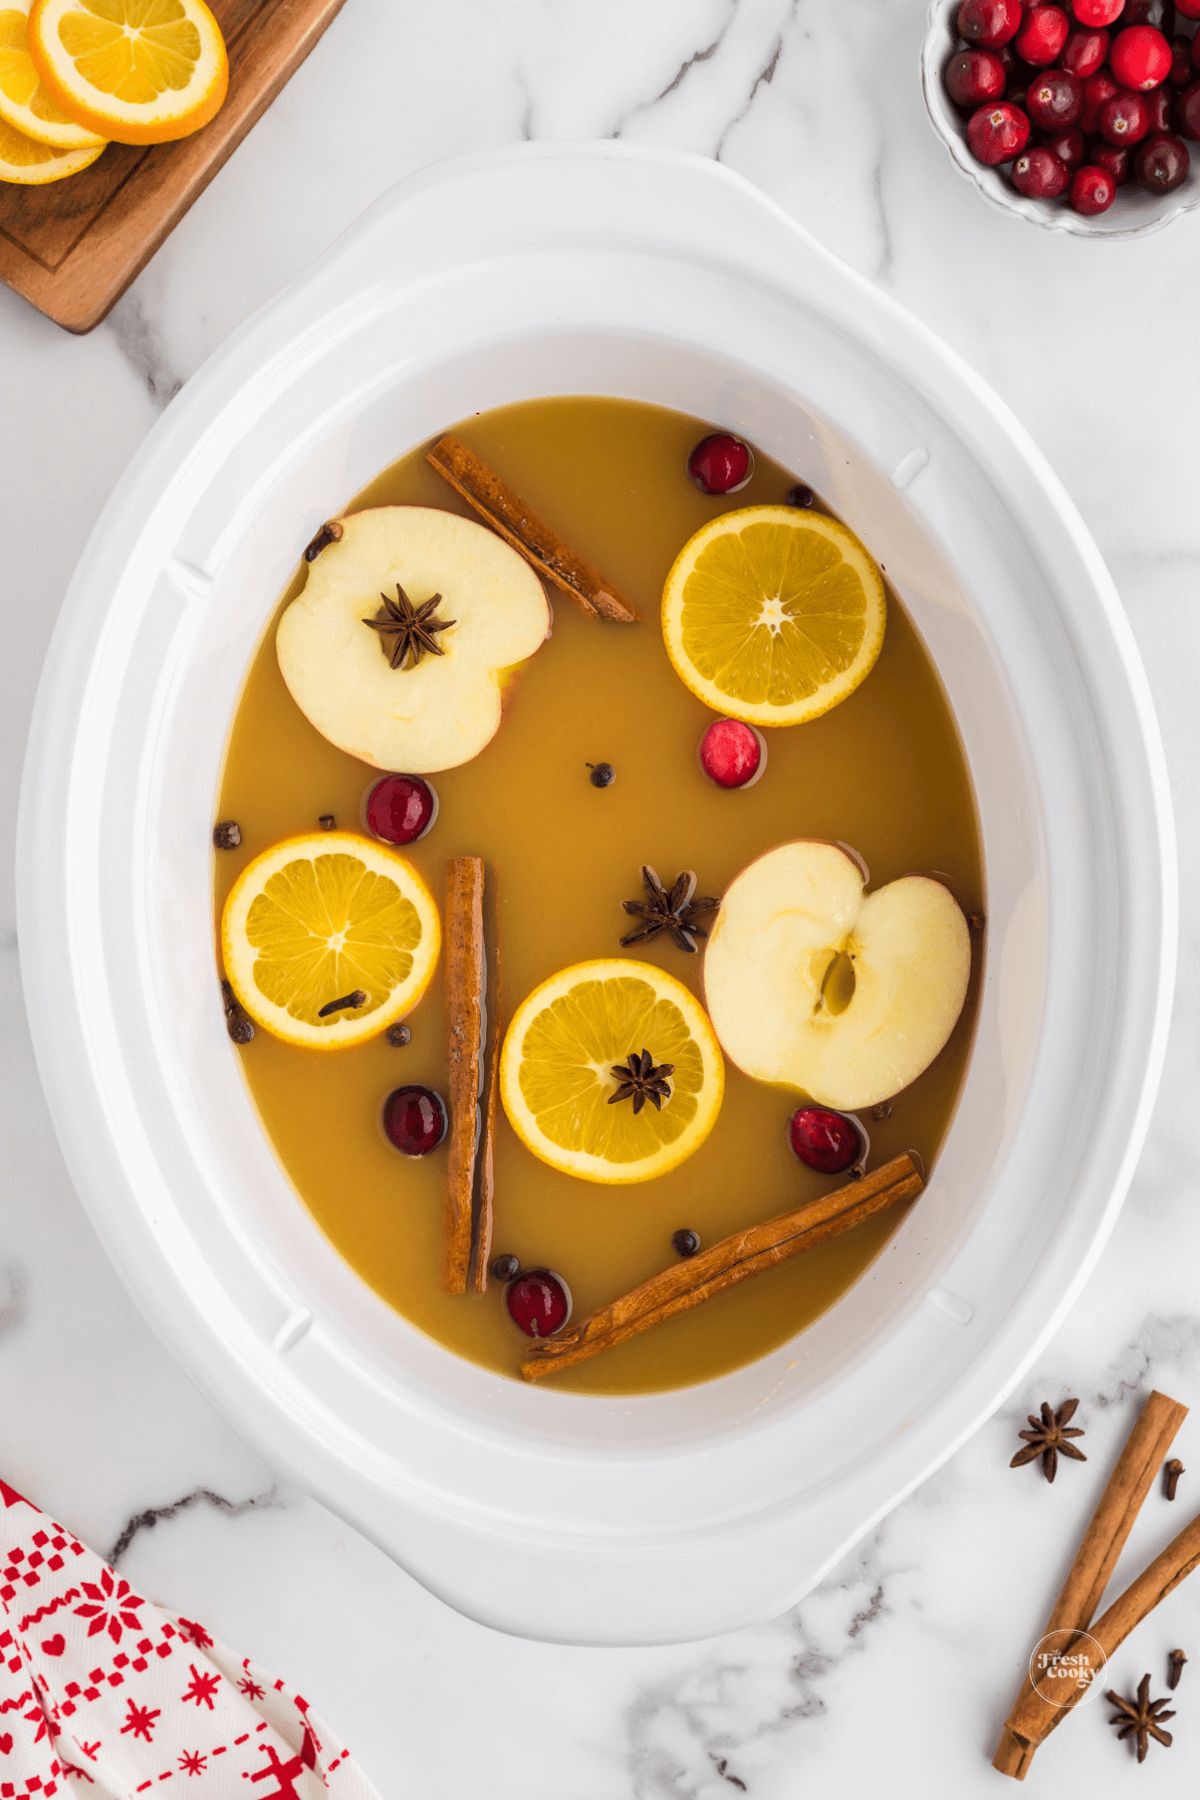 Hot mulled cider wassail in white crockpot with floating apple slices, oranges and spices.